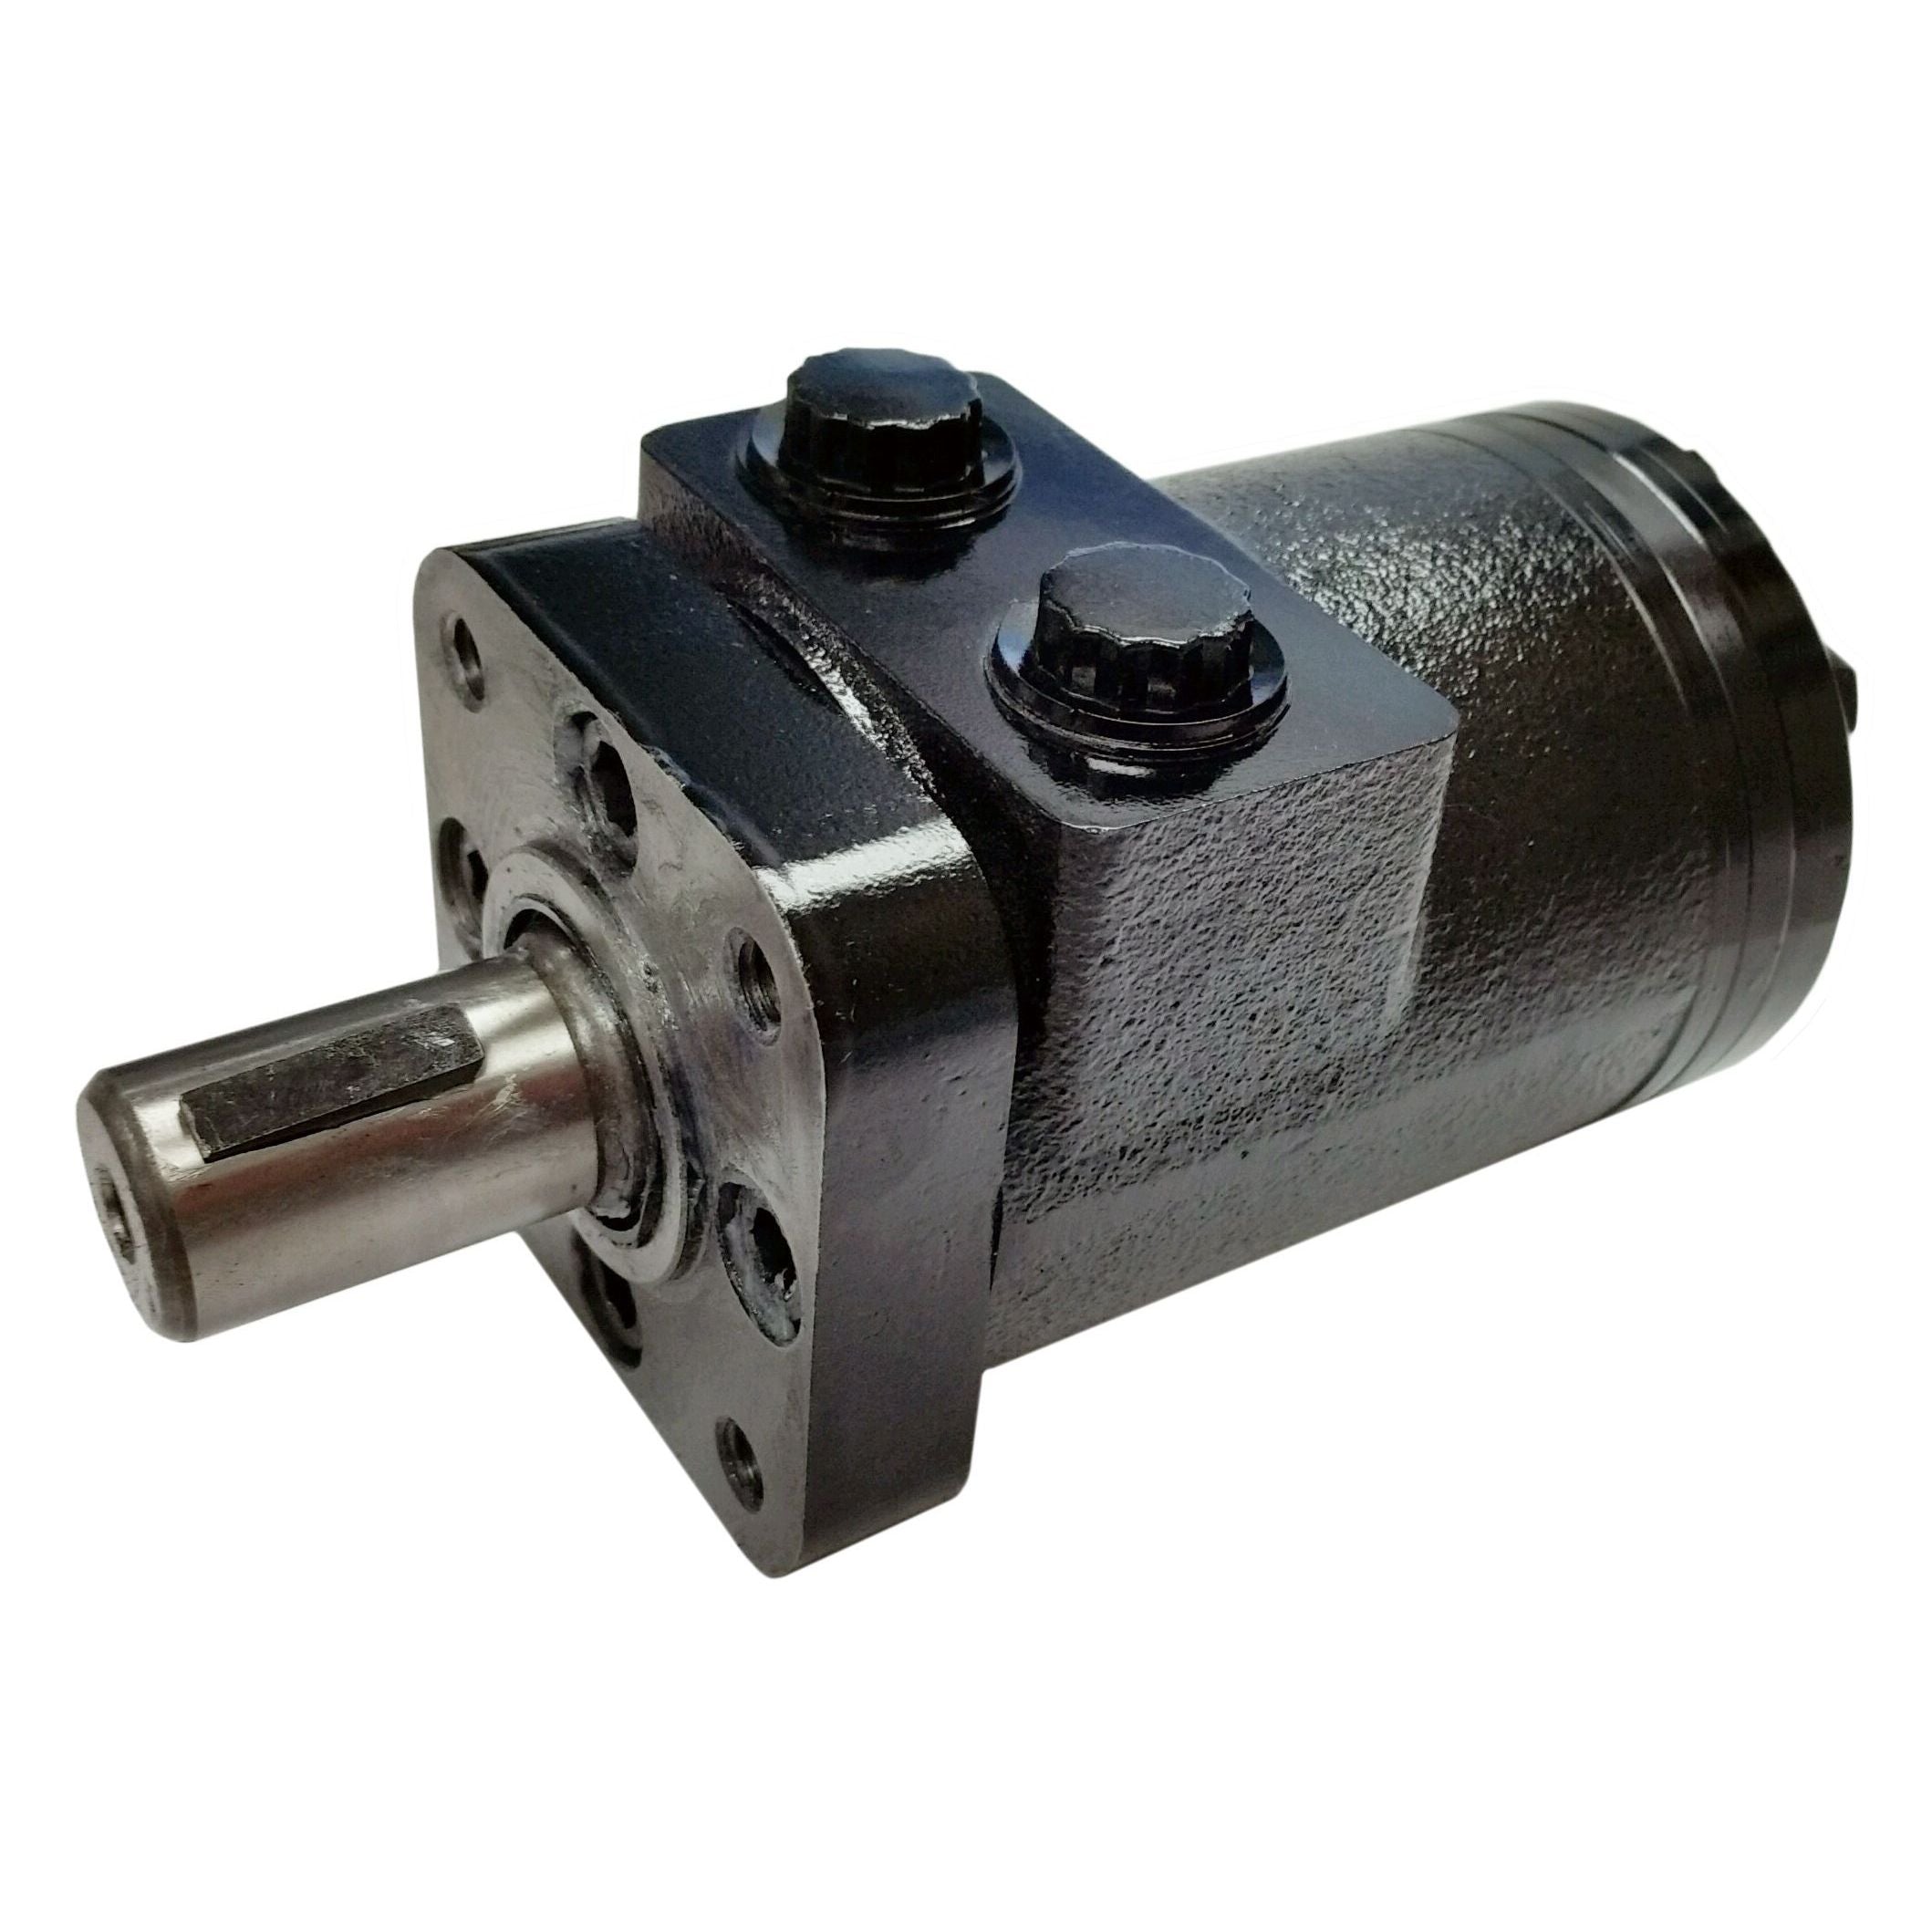 BMPH-50-H4-S-P : Dynamic LSHT Motor, 51.7cc, 1150RPM, 885in-lb, 2031psi Differential, 15.85GPM, SAE A 4-Bolt Mount, 6-Tooth Shaft, Side Ported, 1/2" NPT